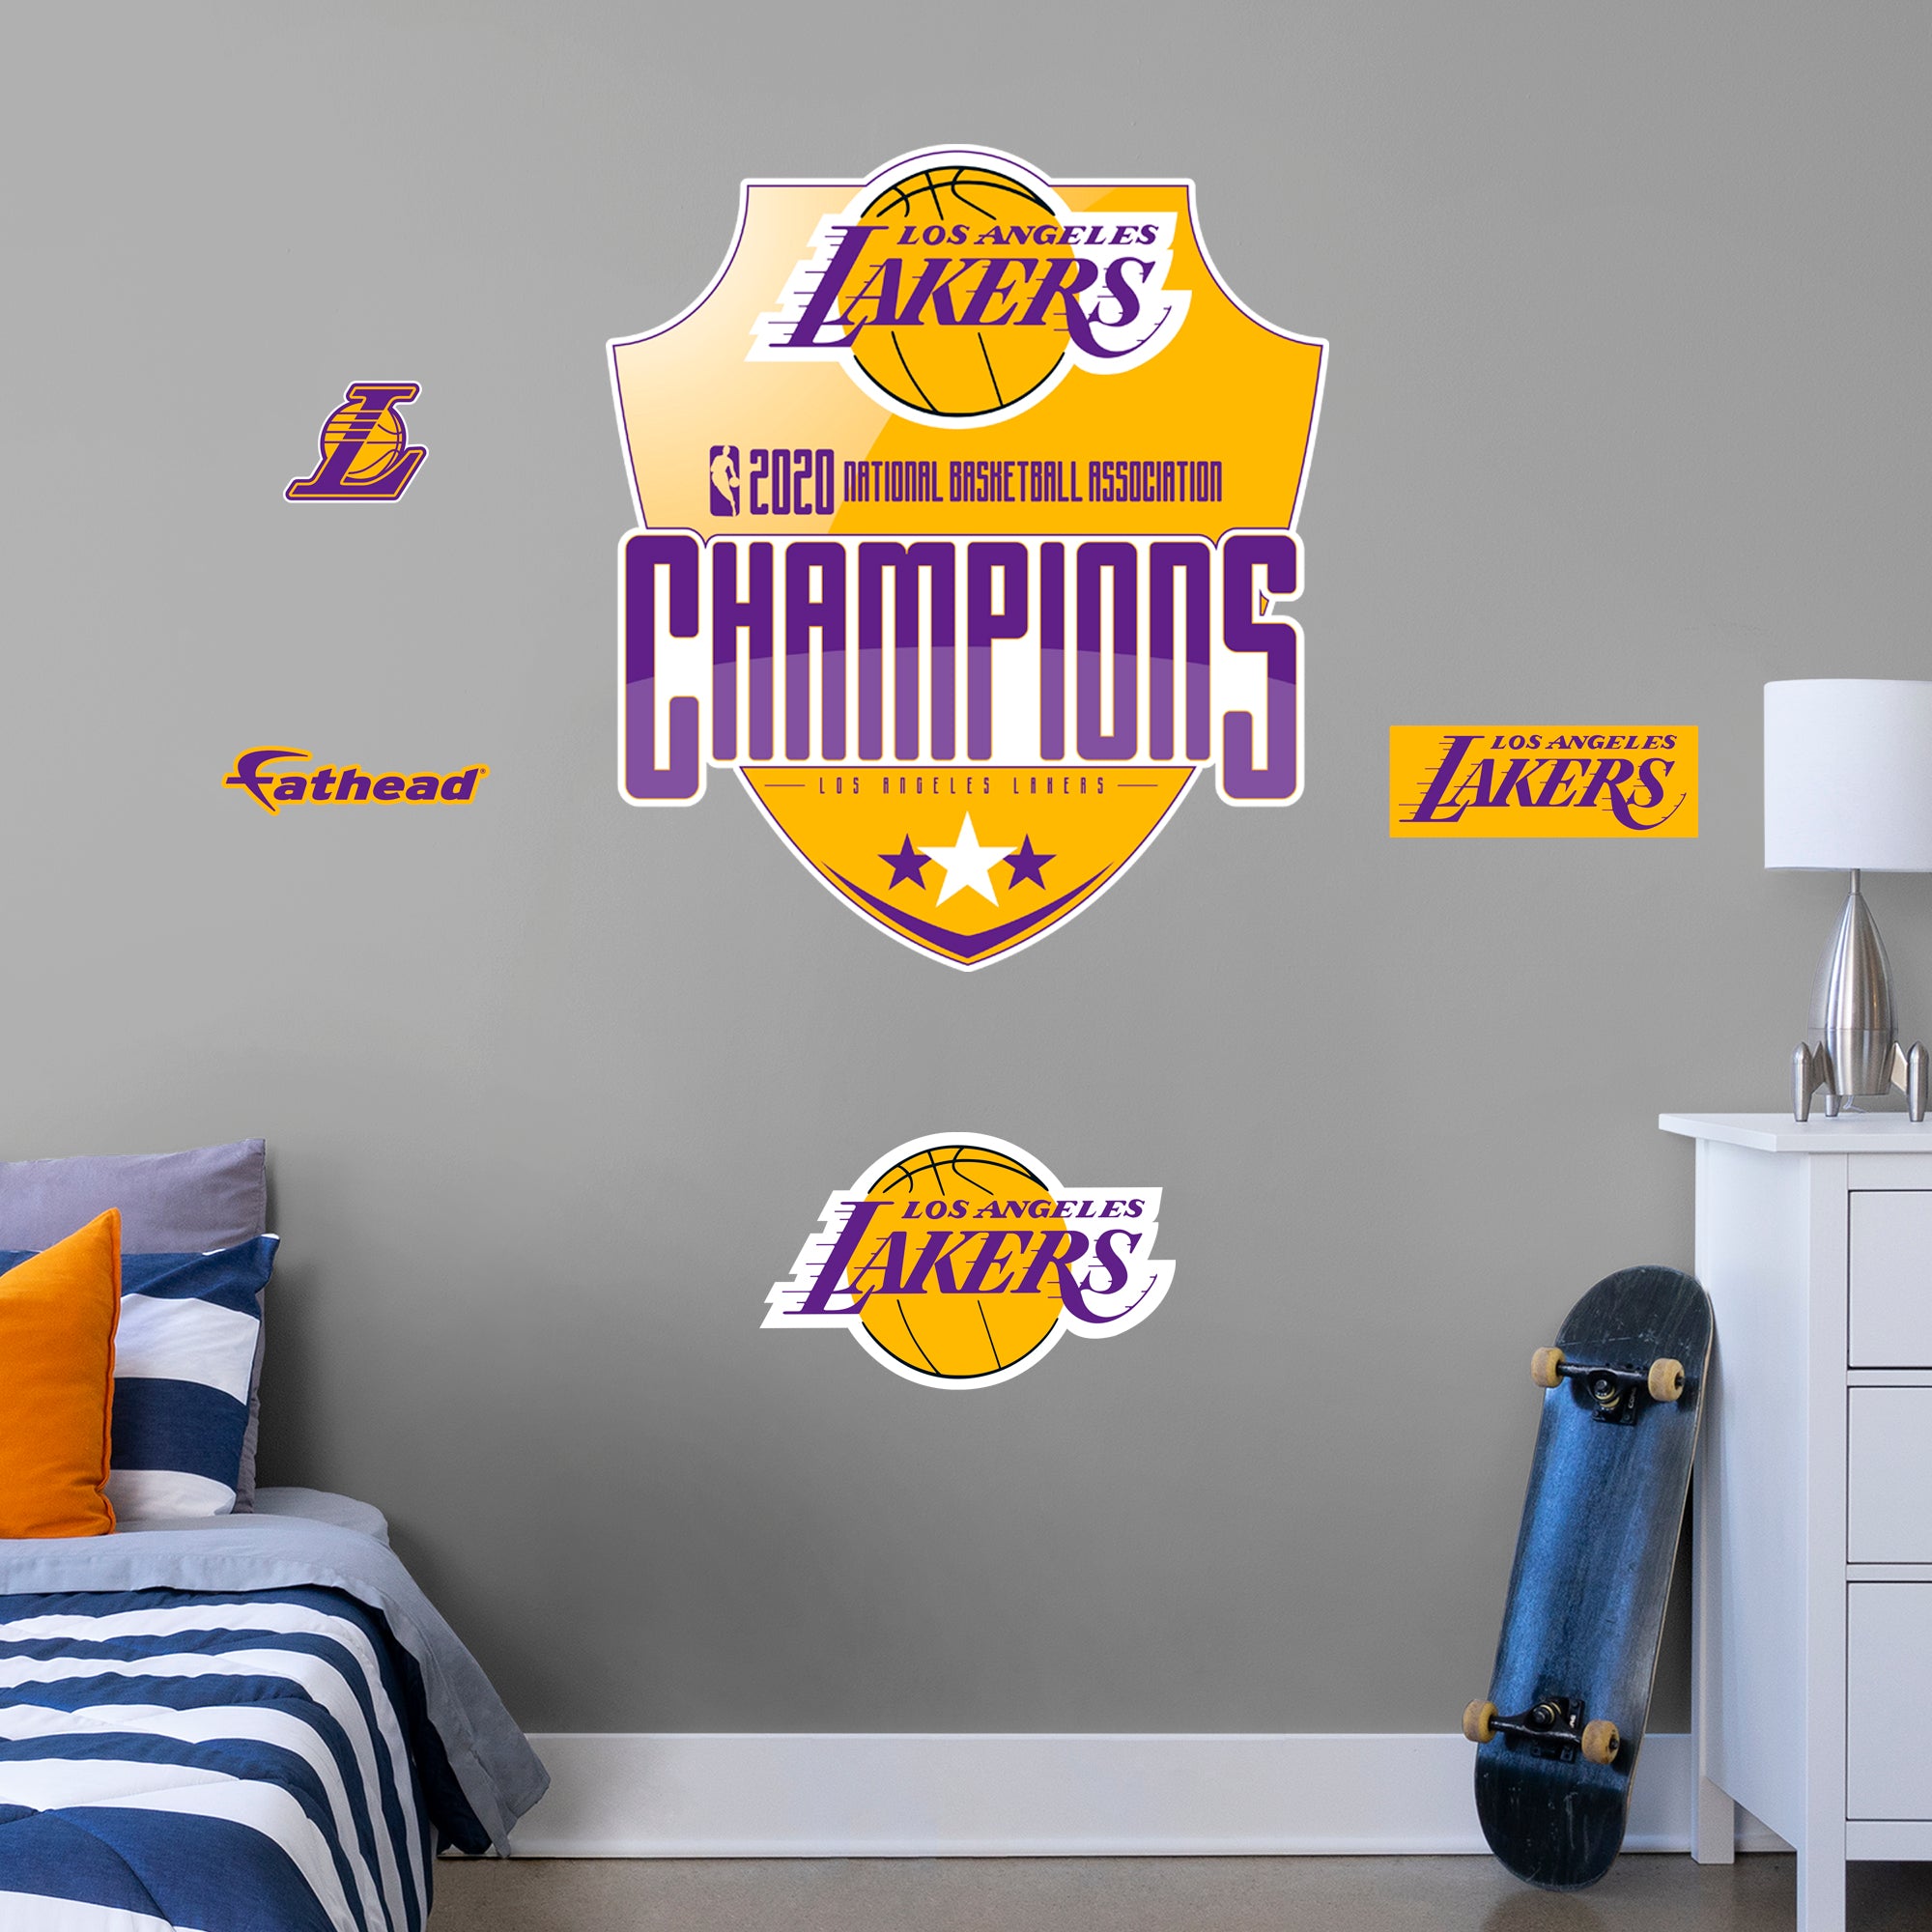 Los Angeles Lakers: 2020 Champions RealBig Logo - Officially Licensed NBA Removable Wall Decal Giant + 4 Decals by Fathead | Vin